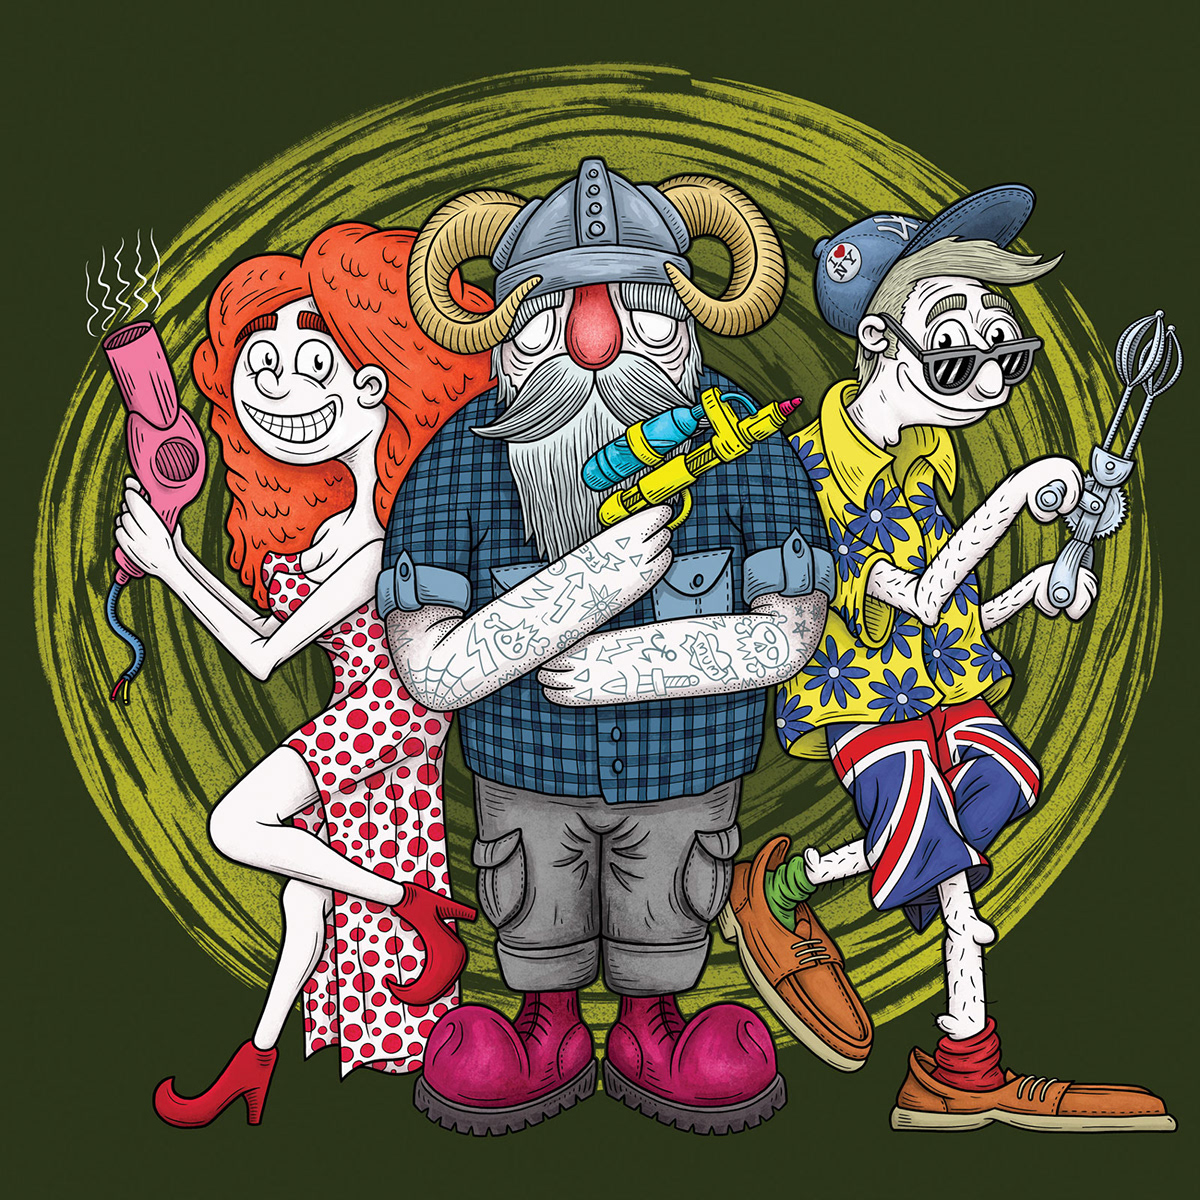 Charlie's Angels style illustration featuring three characters: tattooed Ivar, Bob and loopy Freya